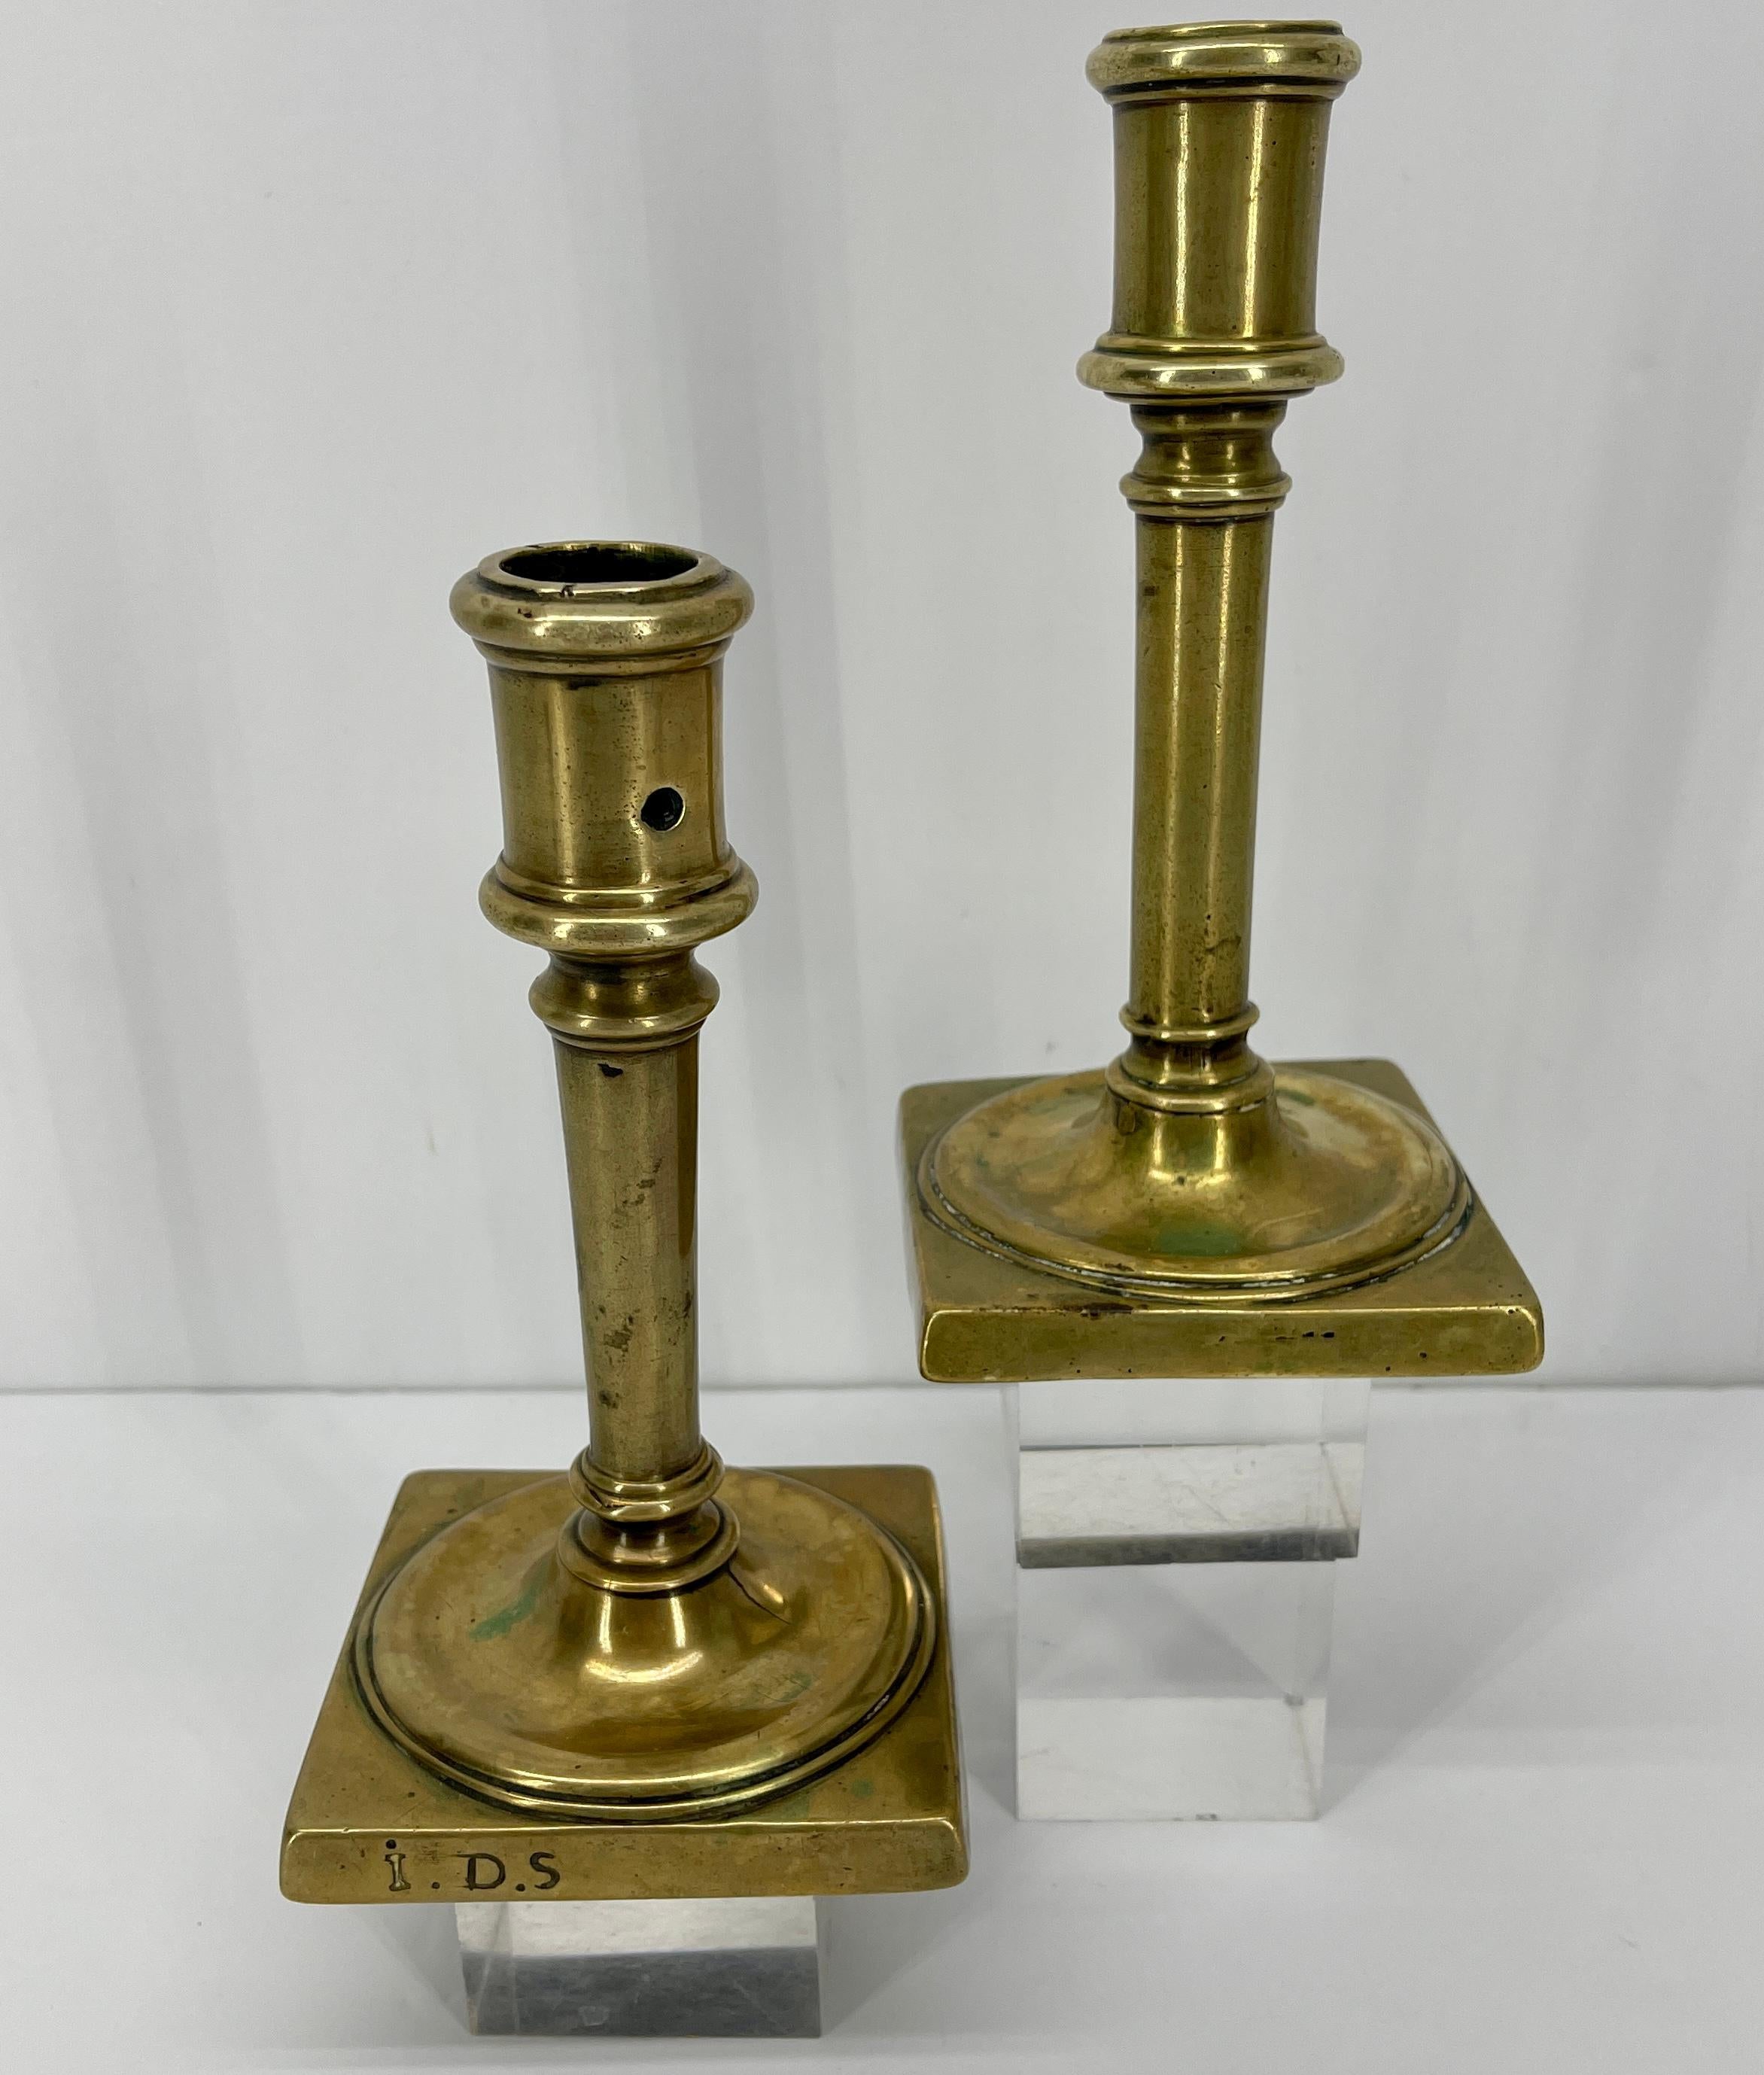 This fine pair of 18th Century brass candlesticks has a sturdy base supporting faceted stems and candle cups. Simply elegant period pieces; each candle cup has a hole for wax removal. In original vintage patina, the candle holders are a wonderful